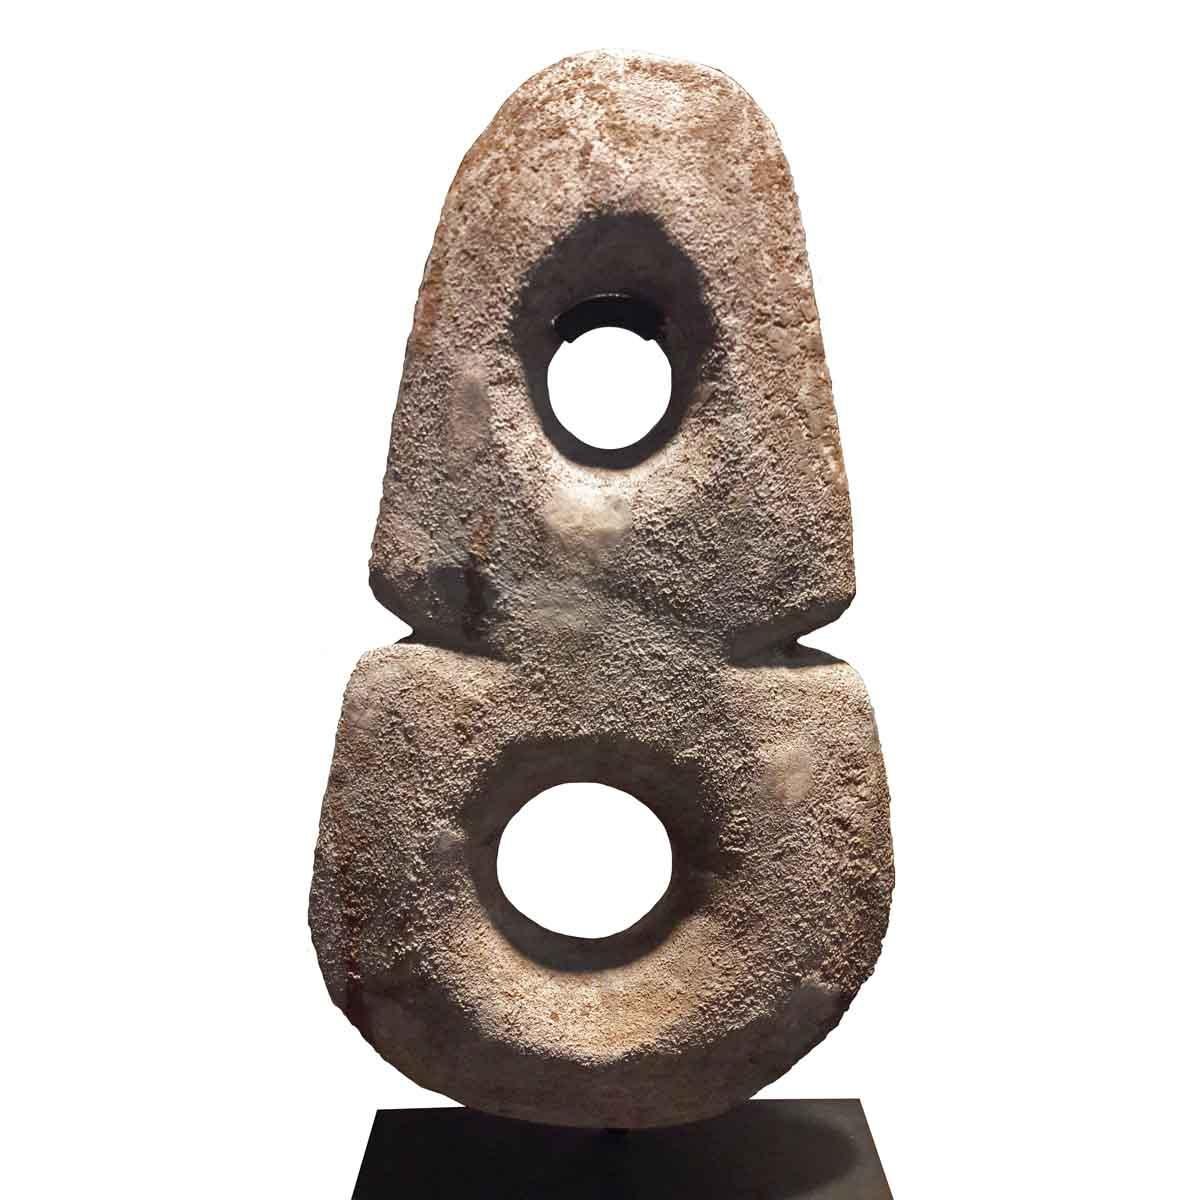 A large vertical sandstone disk sculpture, representing the Yin and Yang symbol. Liaoning, China, early 19th century. Mounted on a metal stand.
 